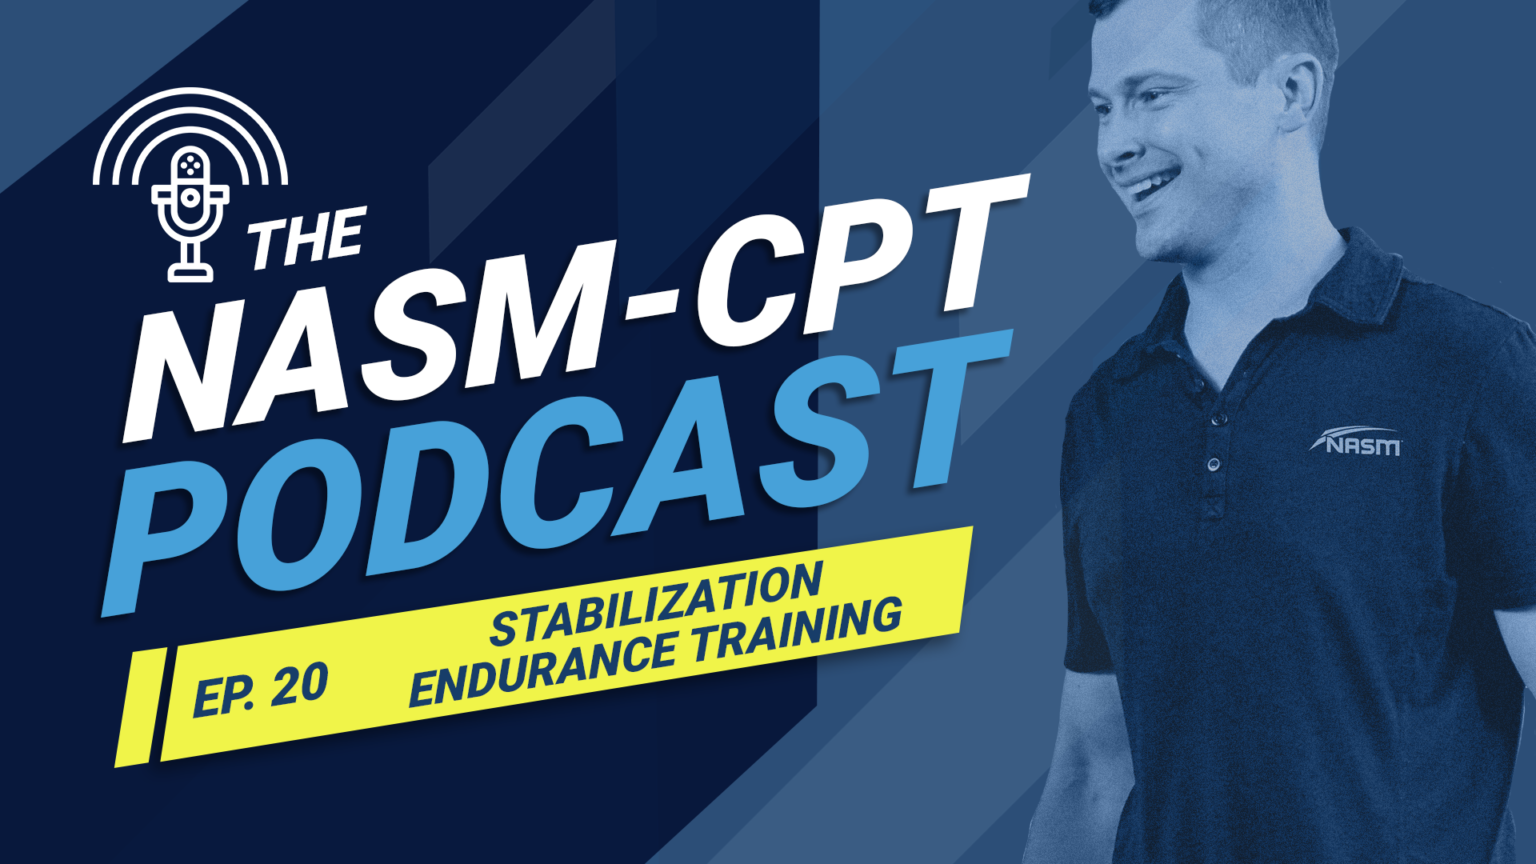 THE NASM-CPT PODCAST: STABILIZATION ENDURANCE TRAINING: